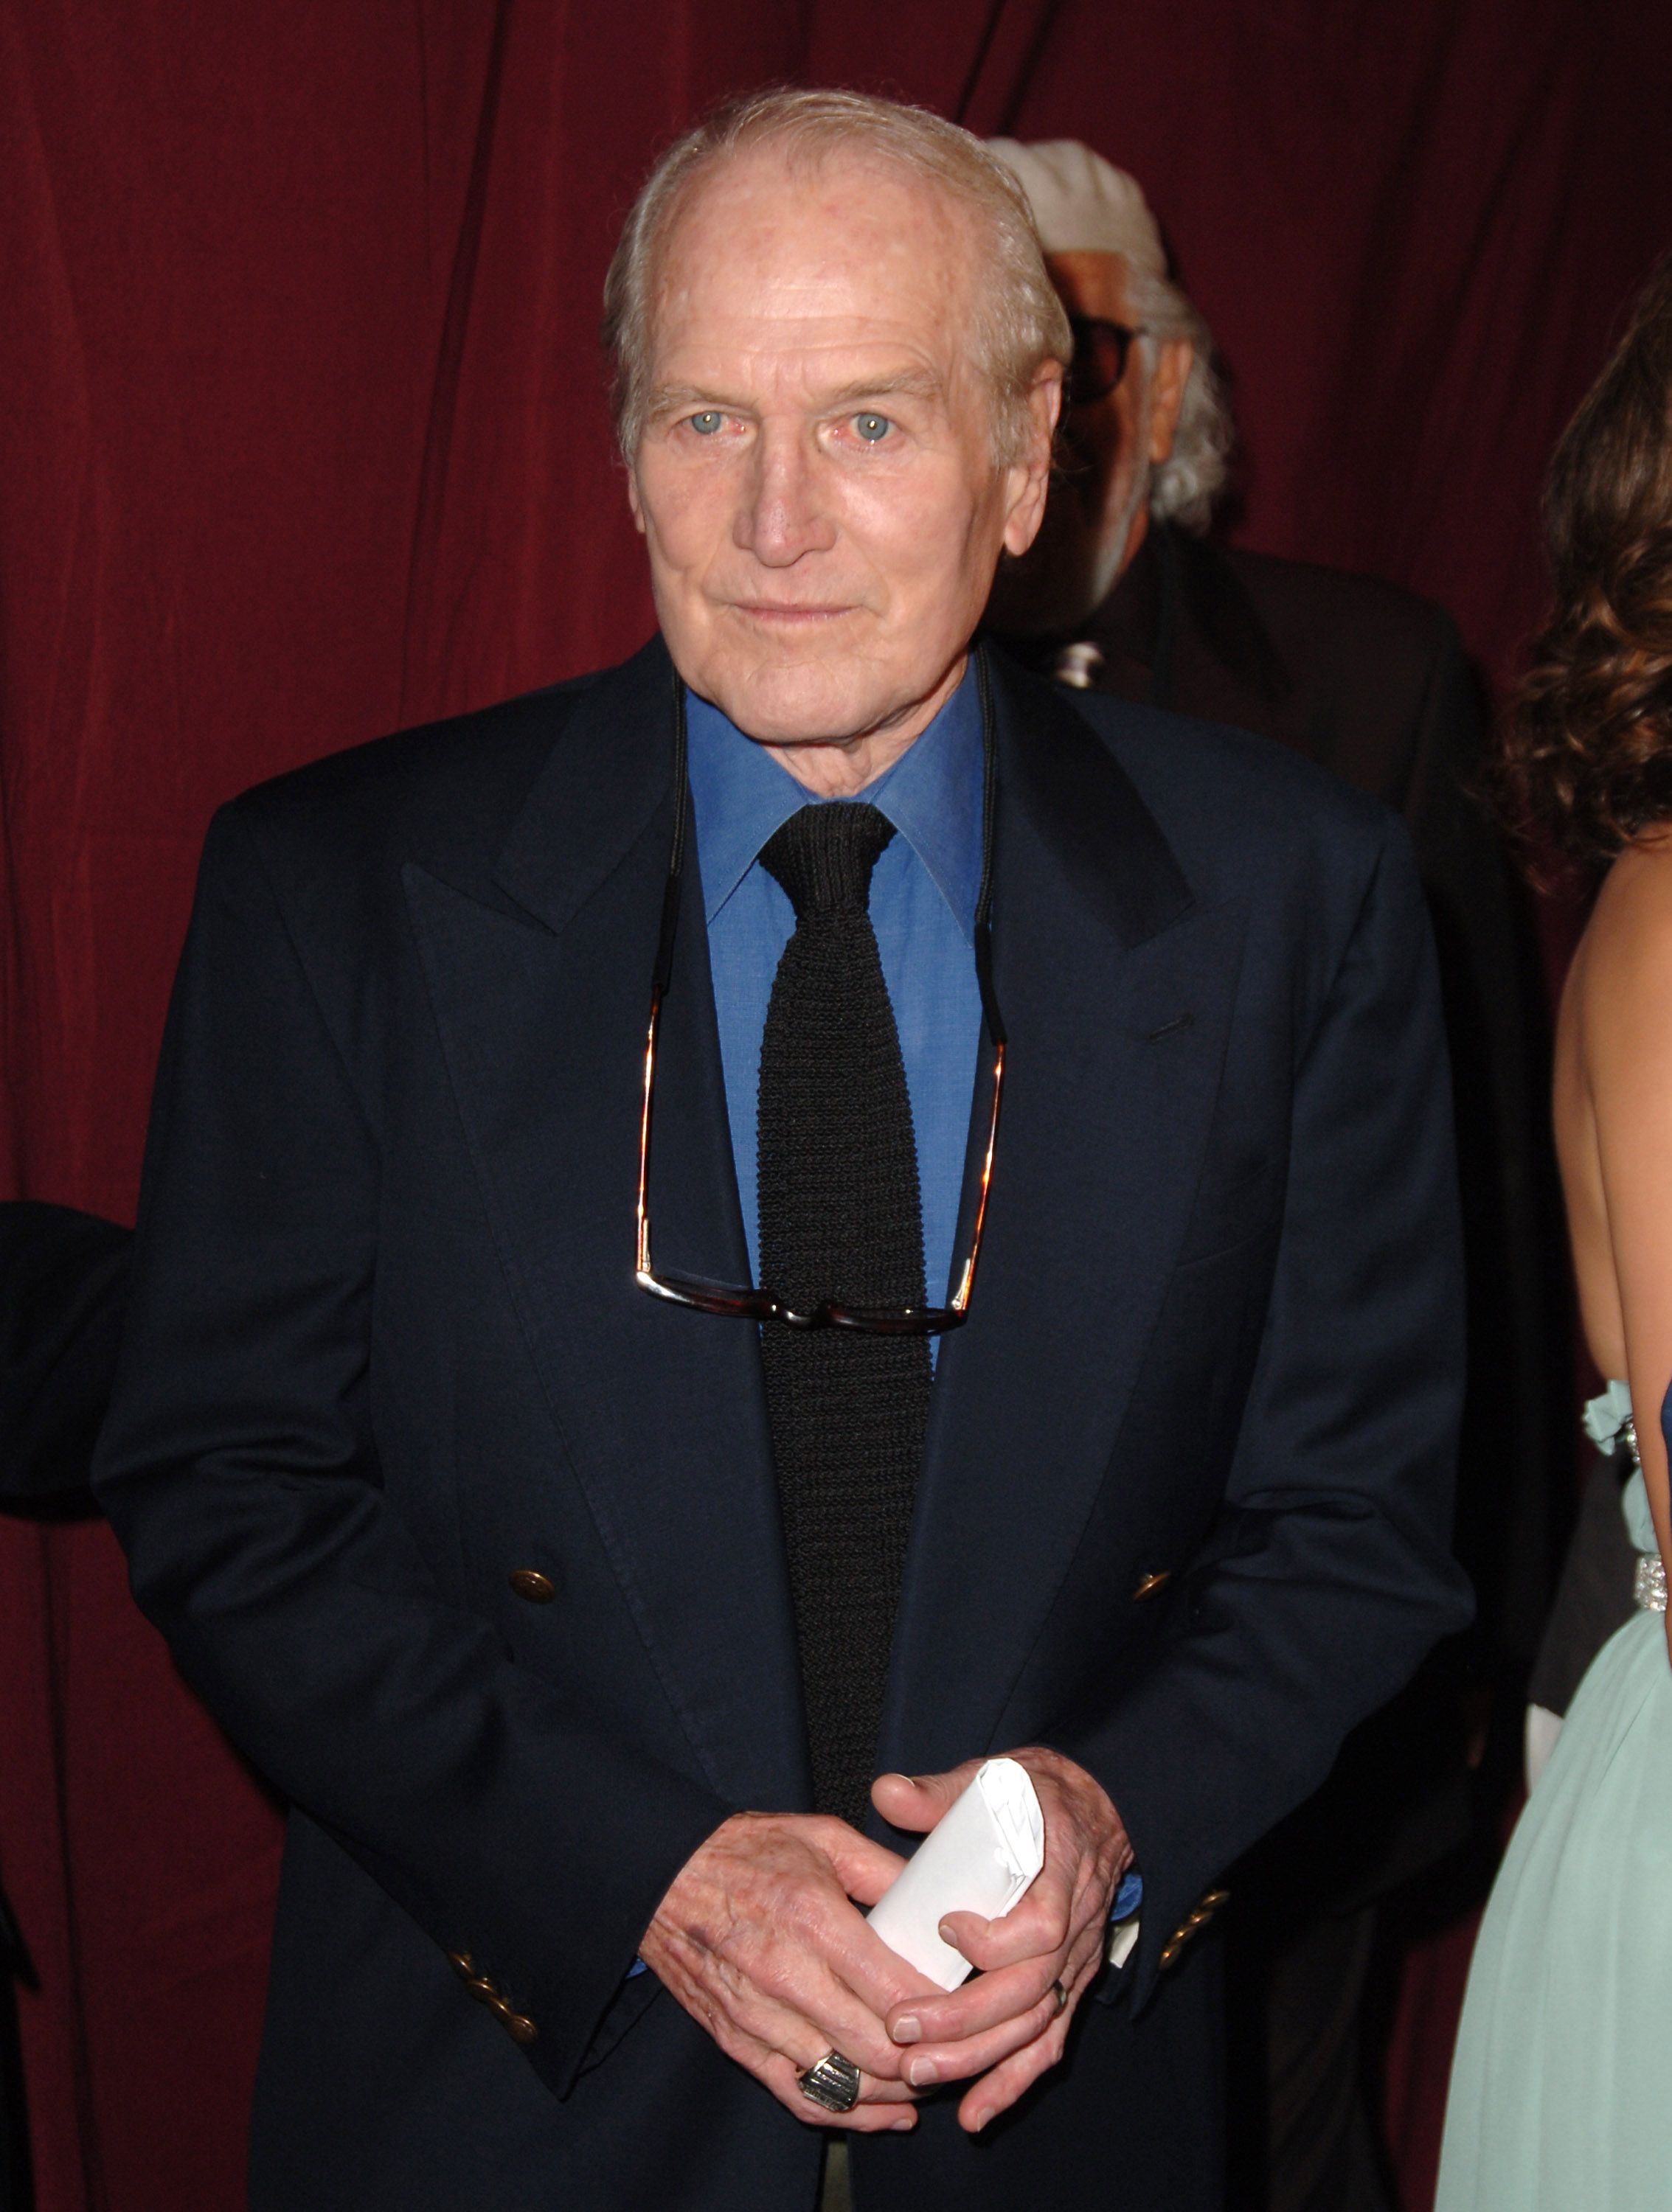 Paul Newman at the Kodak Theatre in Hollywood in 2006 | Photo: Getty Images